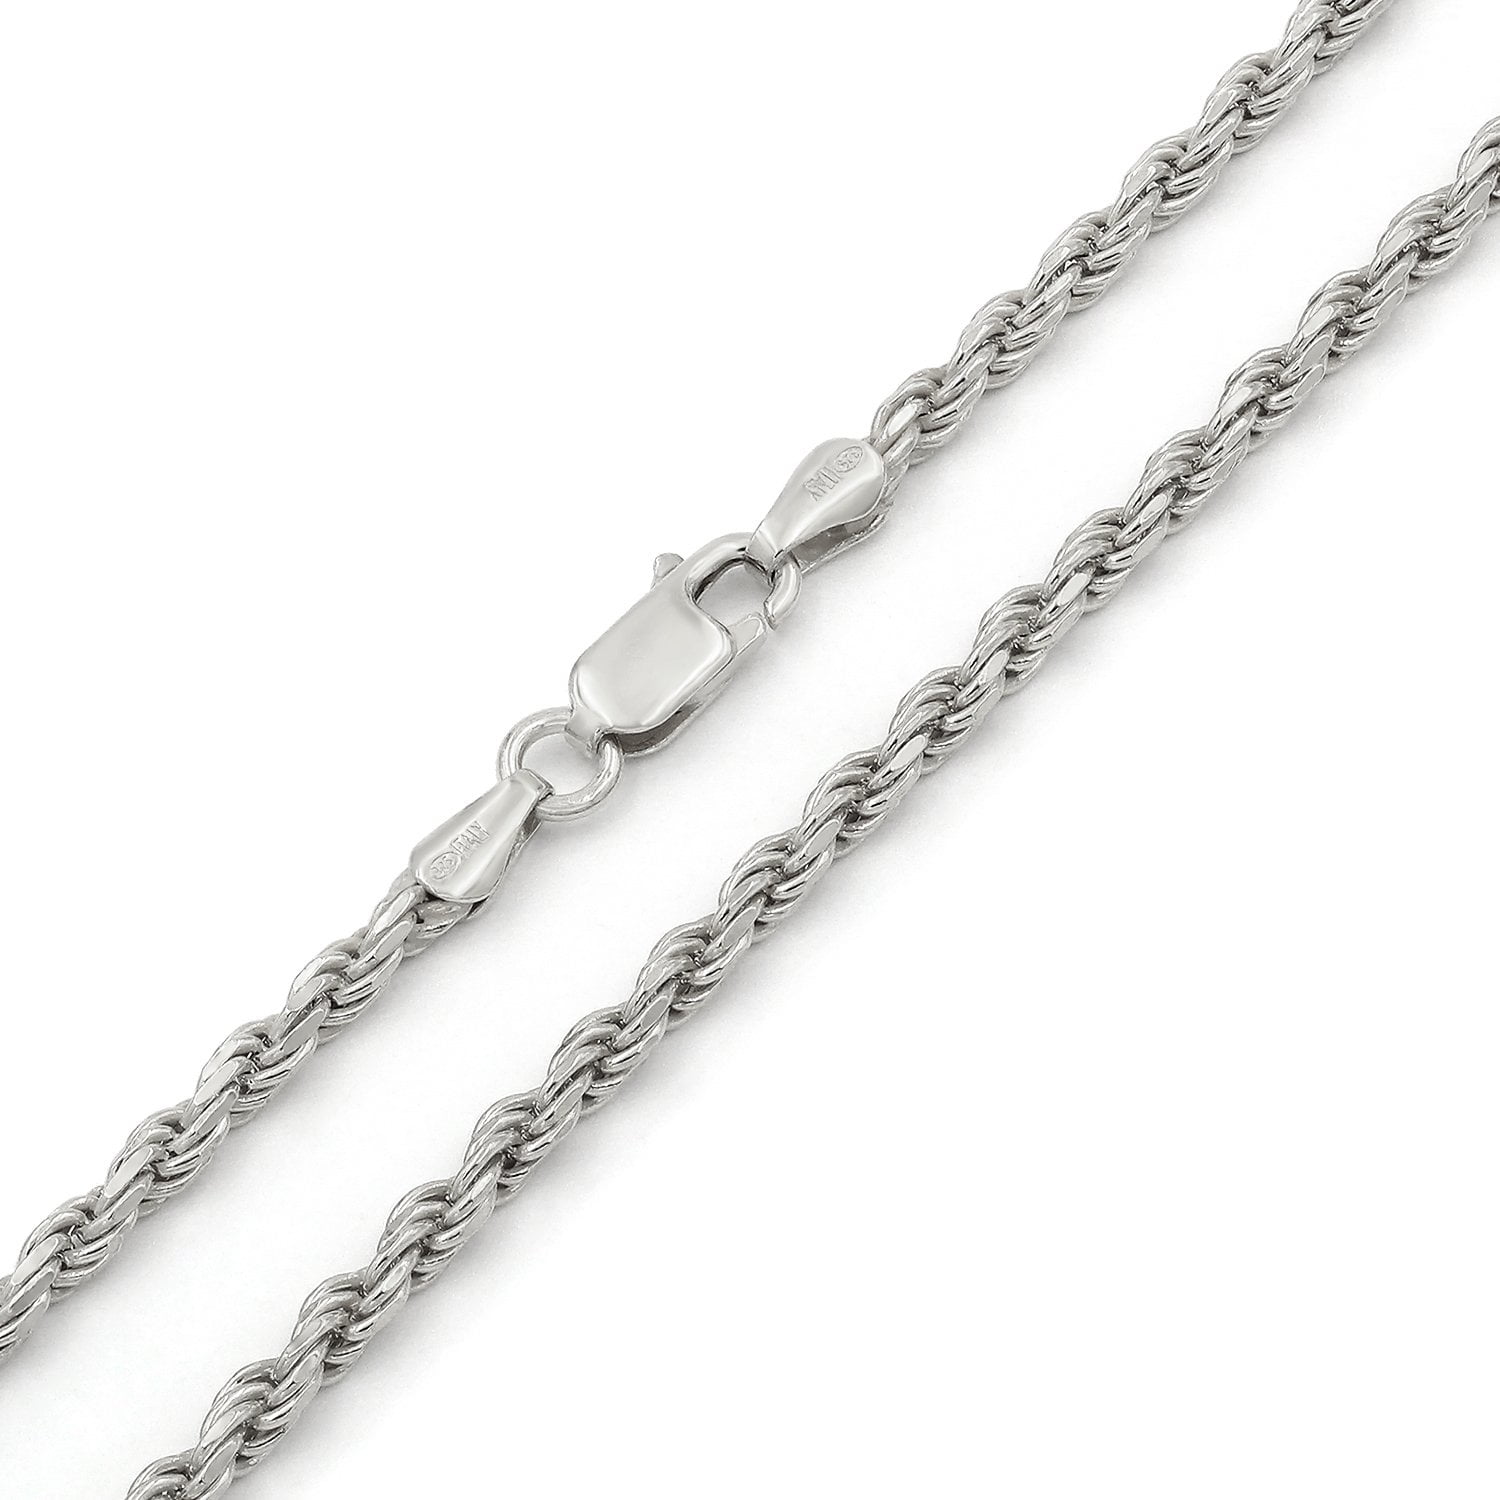 ROPE080/925 STERLING SILVER CHAIN 24 INCH LONG /LOBSTER LOCK ROPE DESIGN